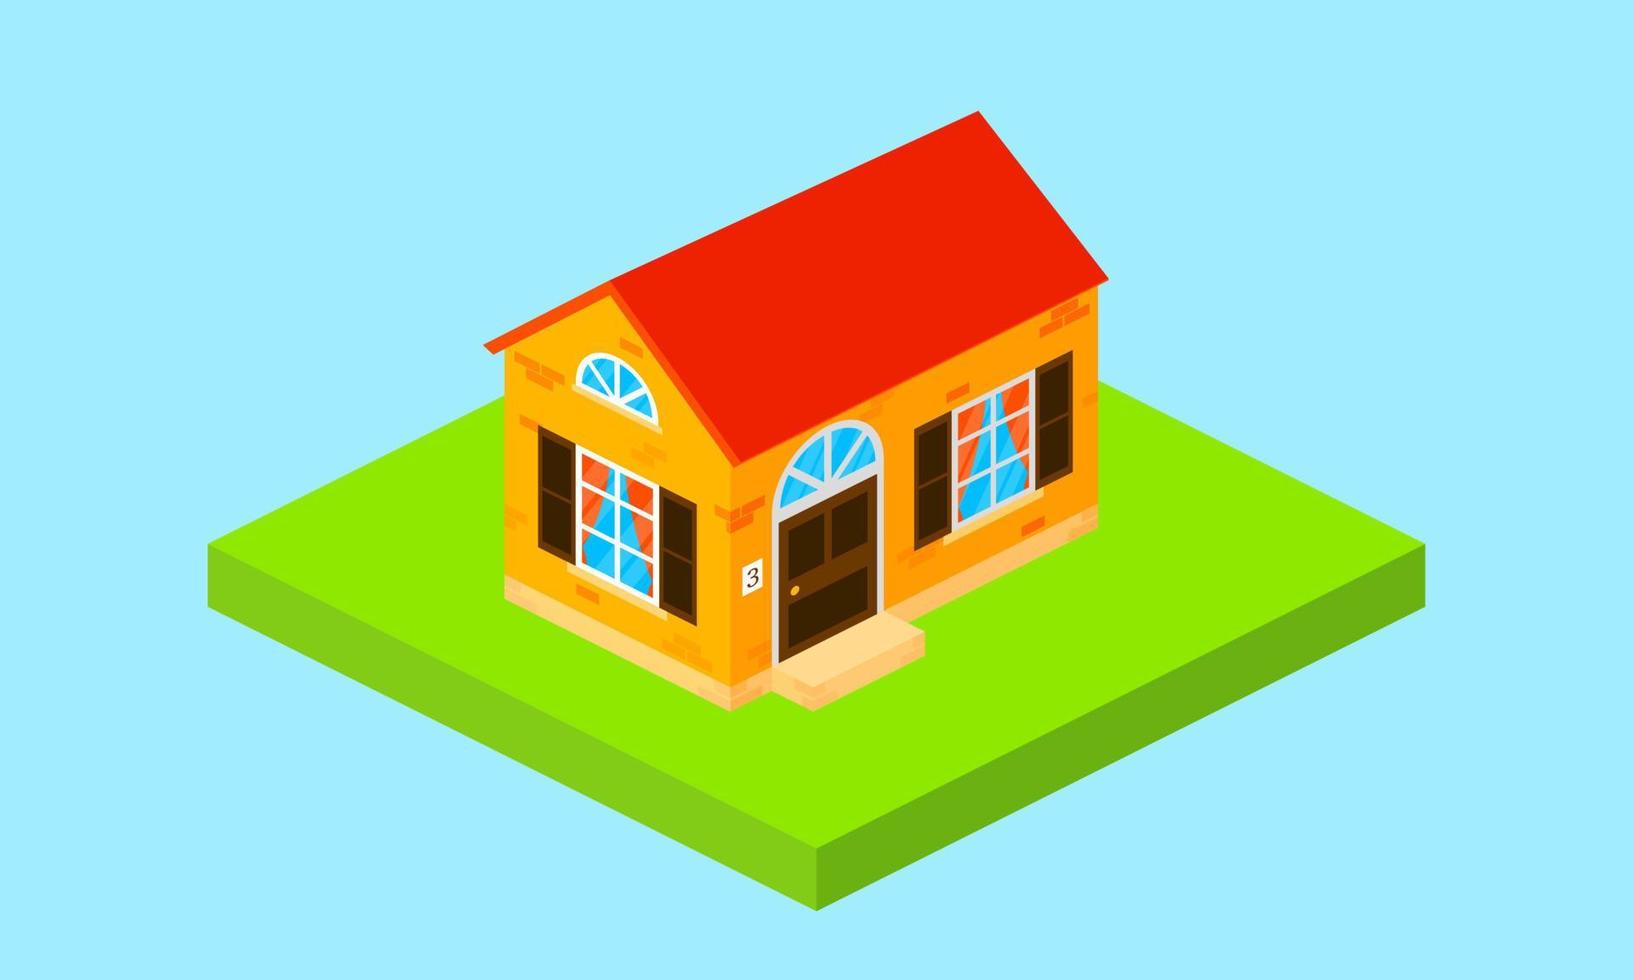 Beautiful small house on green ground isolated on blue. Property, real estate, construction, rent, home concept. Flat Isometric icon. Vector illustration on a blue background.